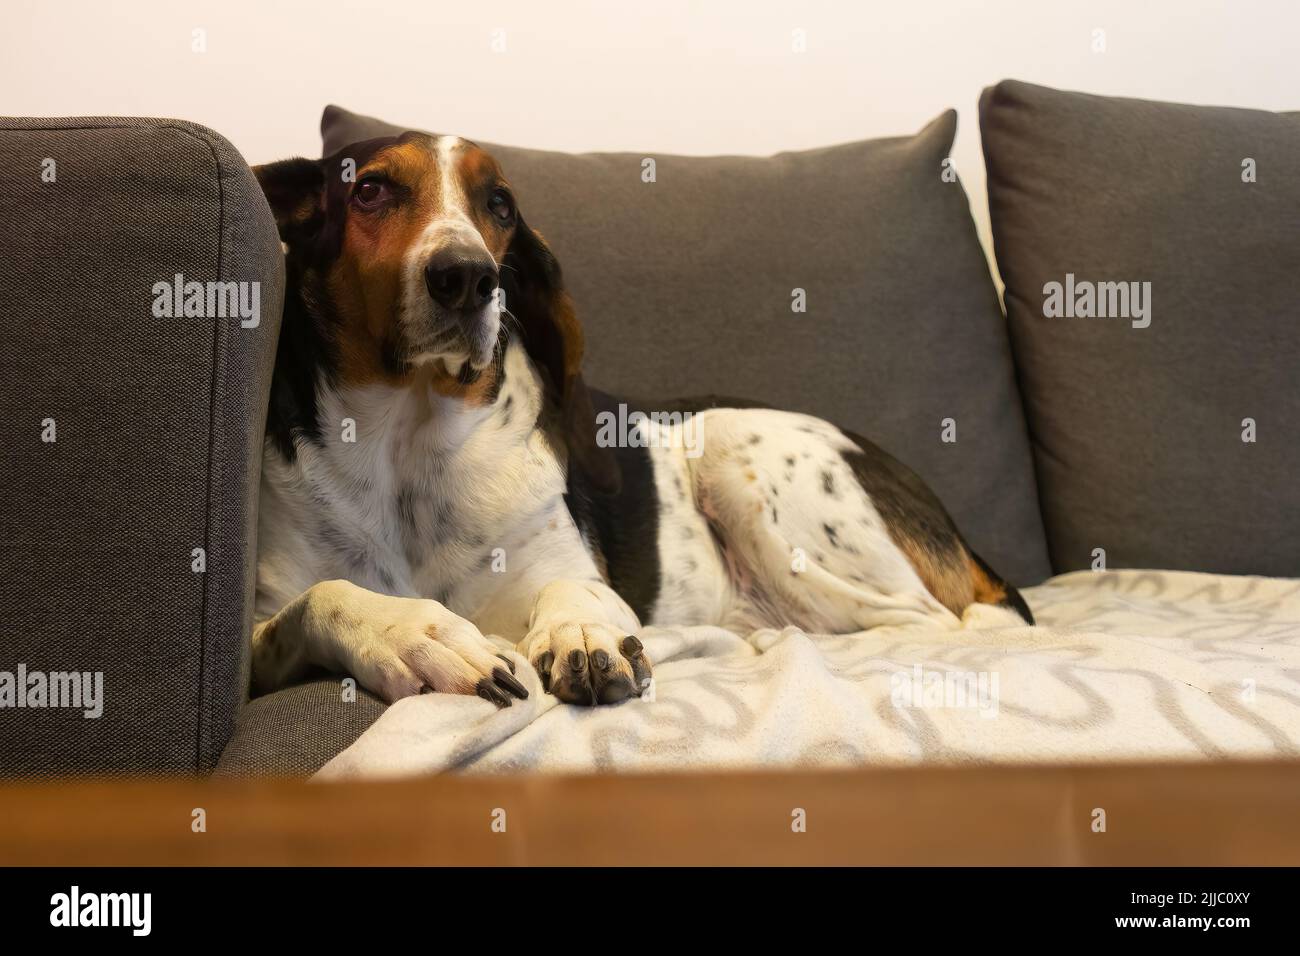 Spoiled dog with long ears sitting on the couch. Stock Photo